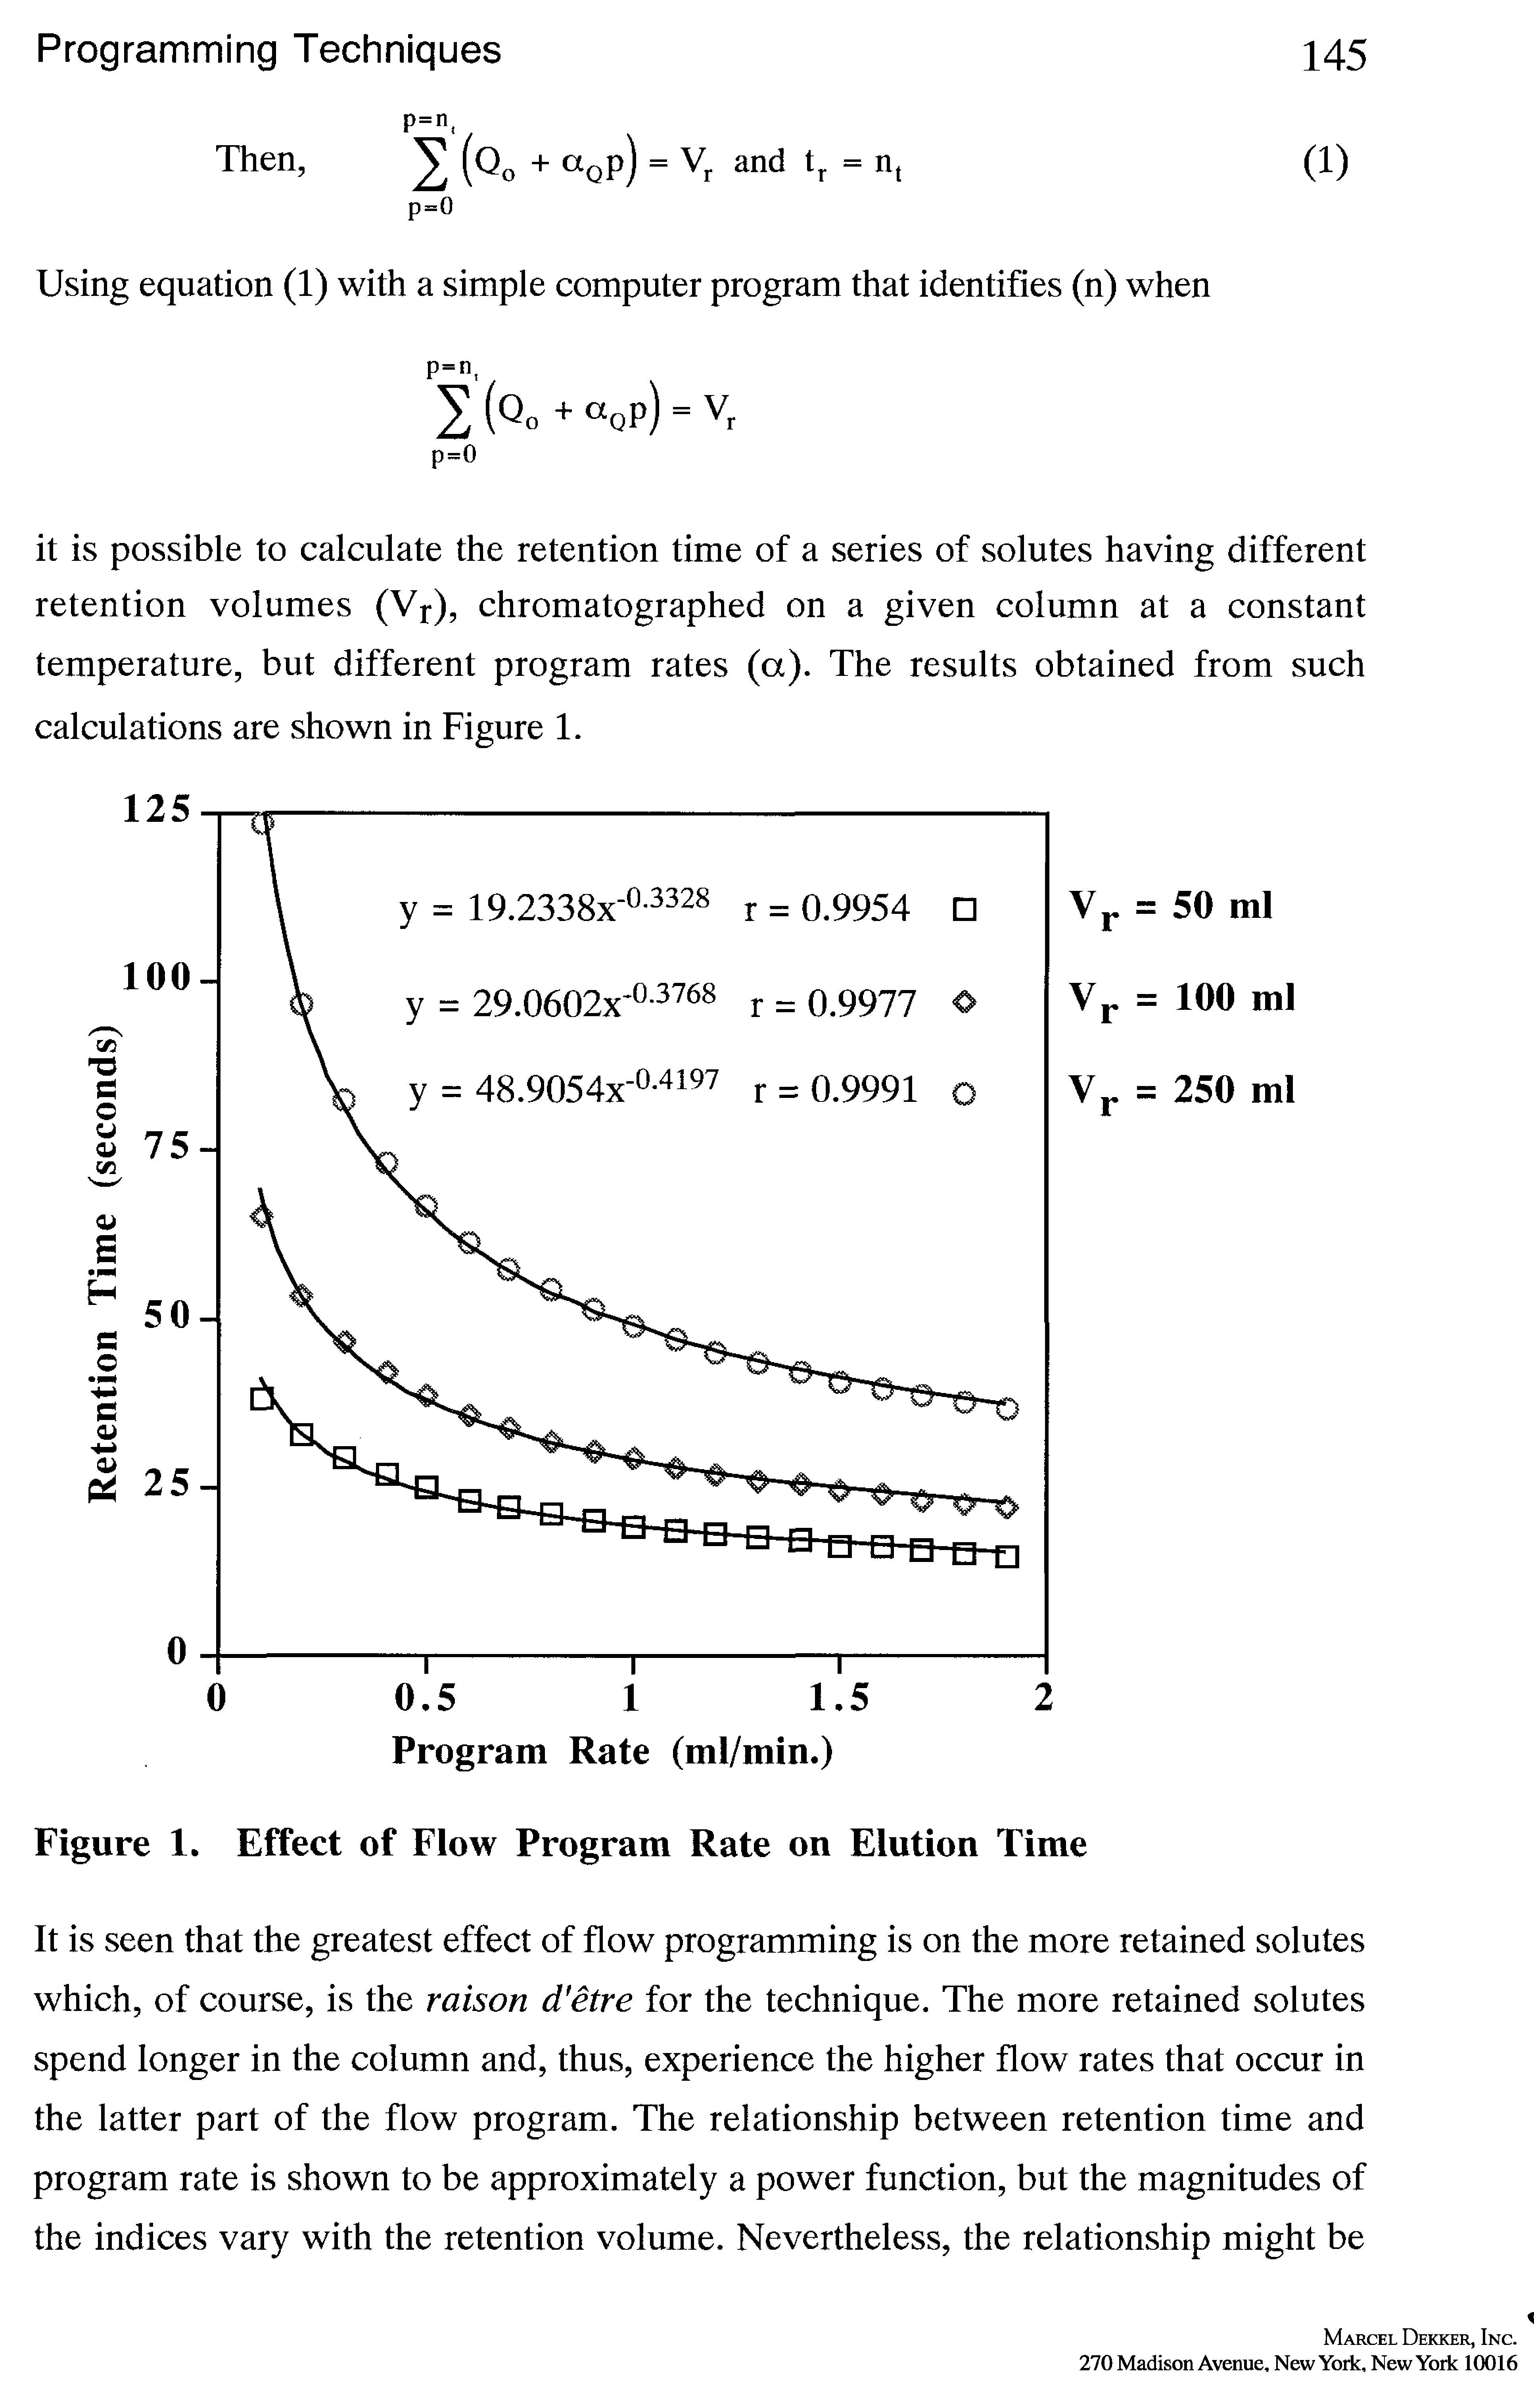 Figure 1. Effect of Flow Program Rate on Elution Time...